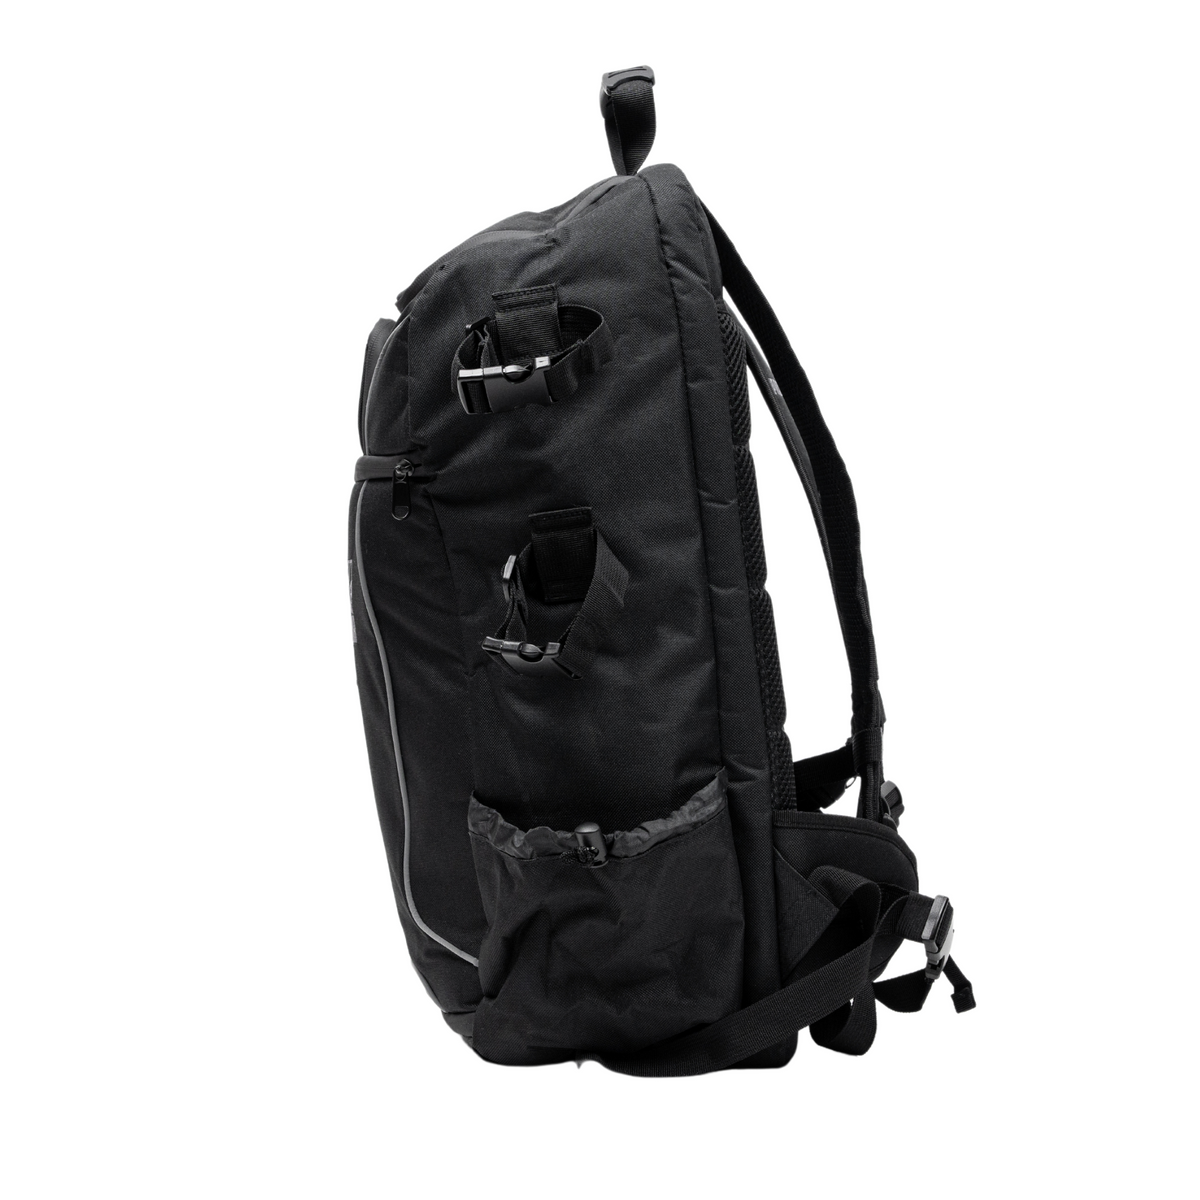 PacBak Byway Backpack